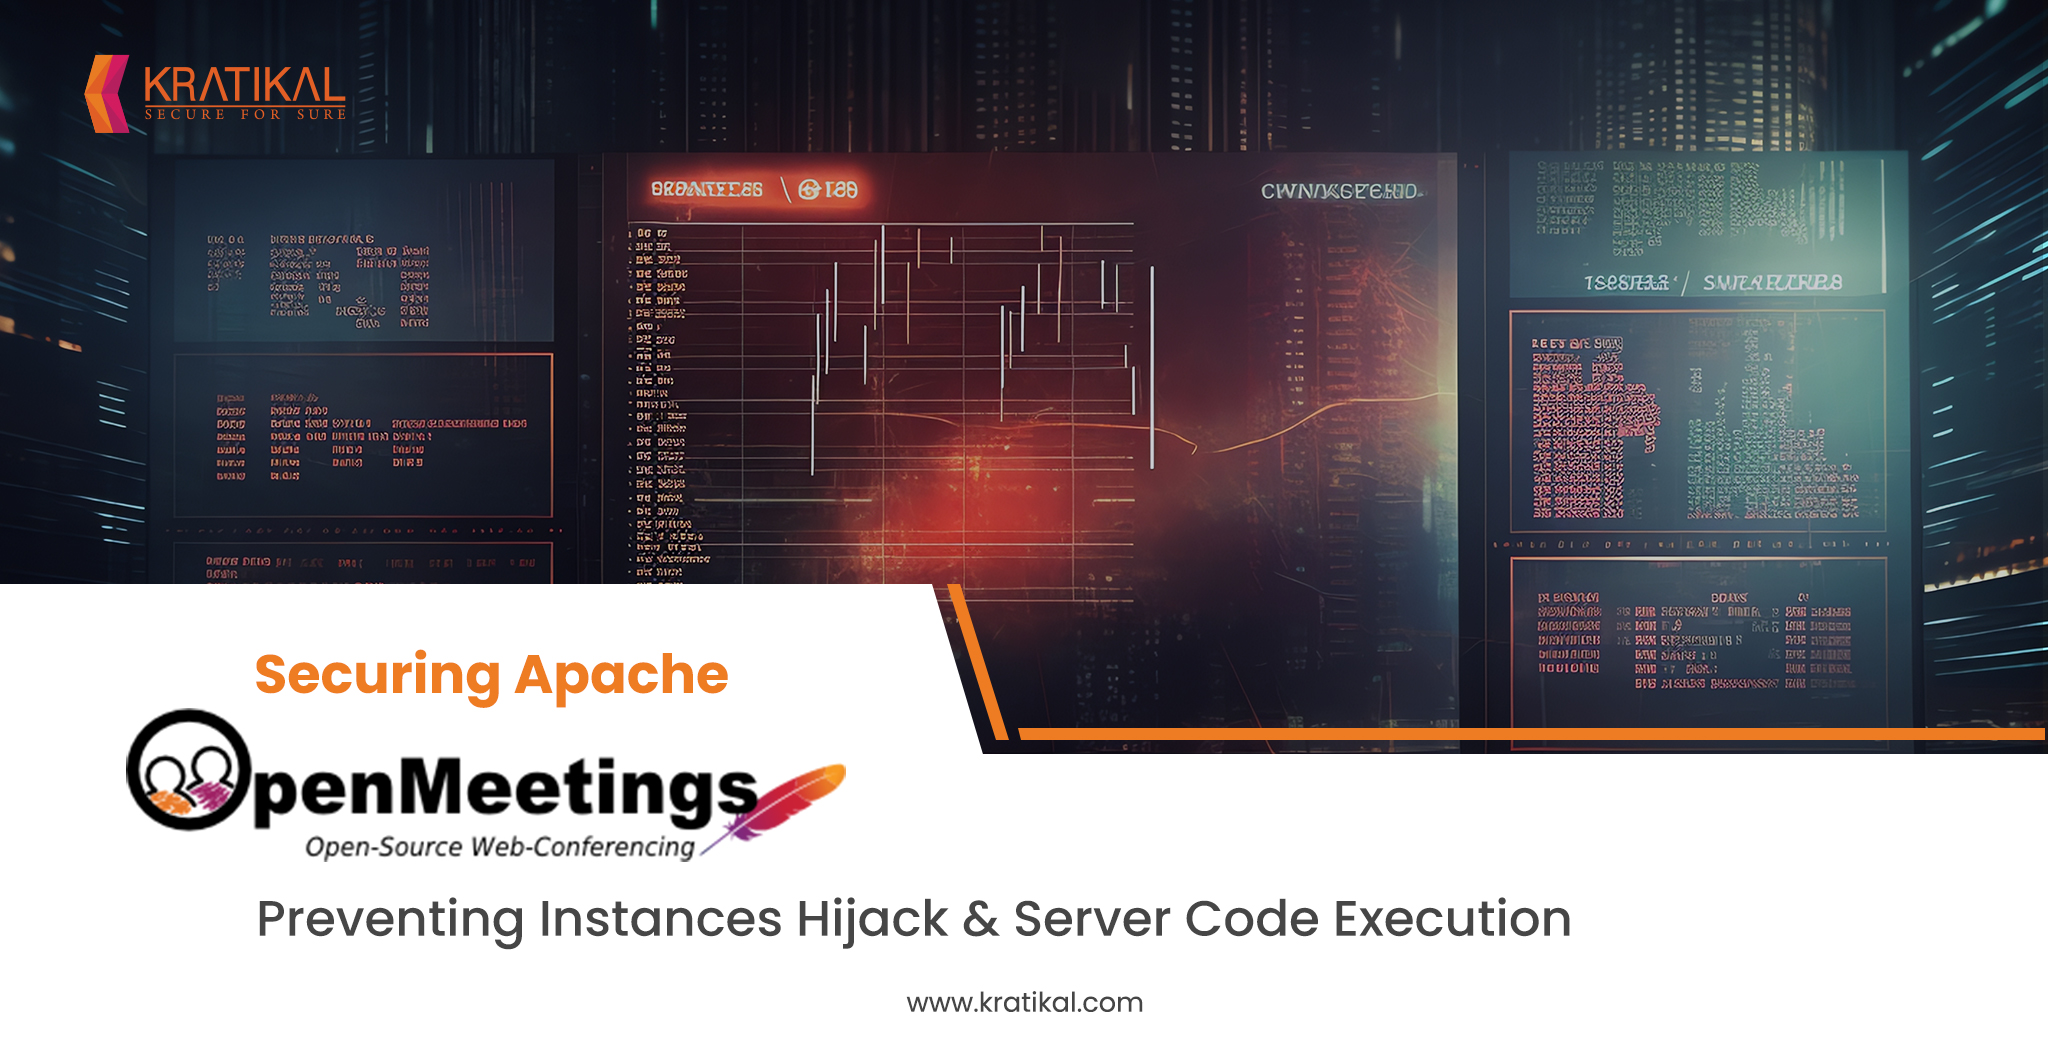 Apache OpenMeetings Security Vulnerabilities: Instances Hijack & Server Code Execution